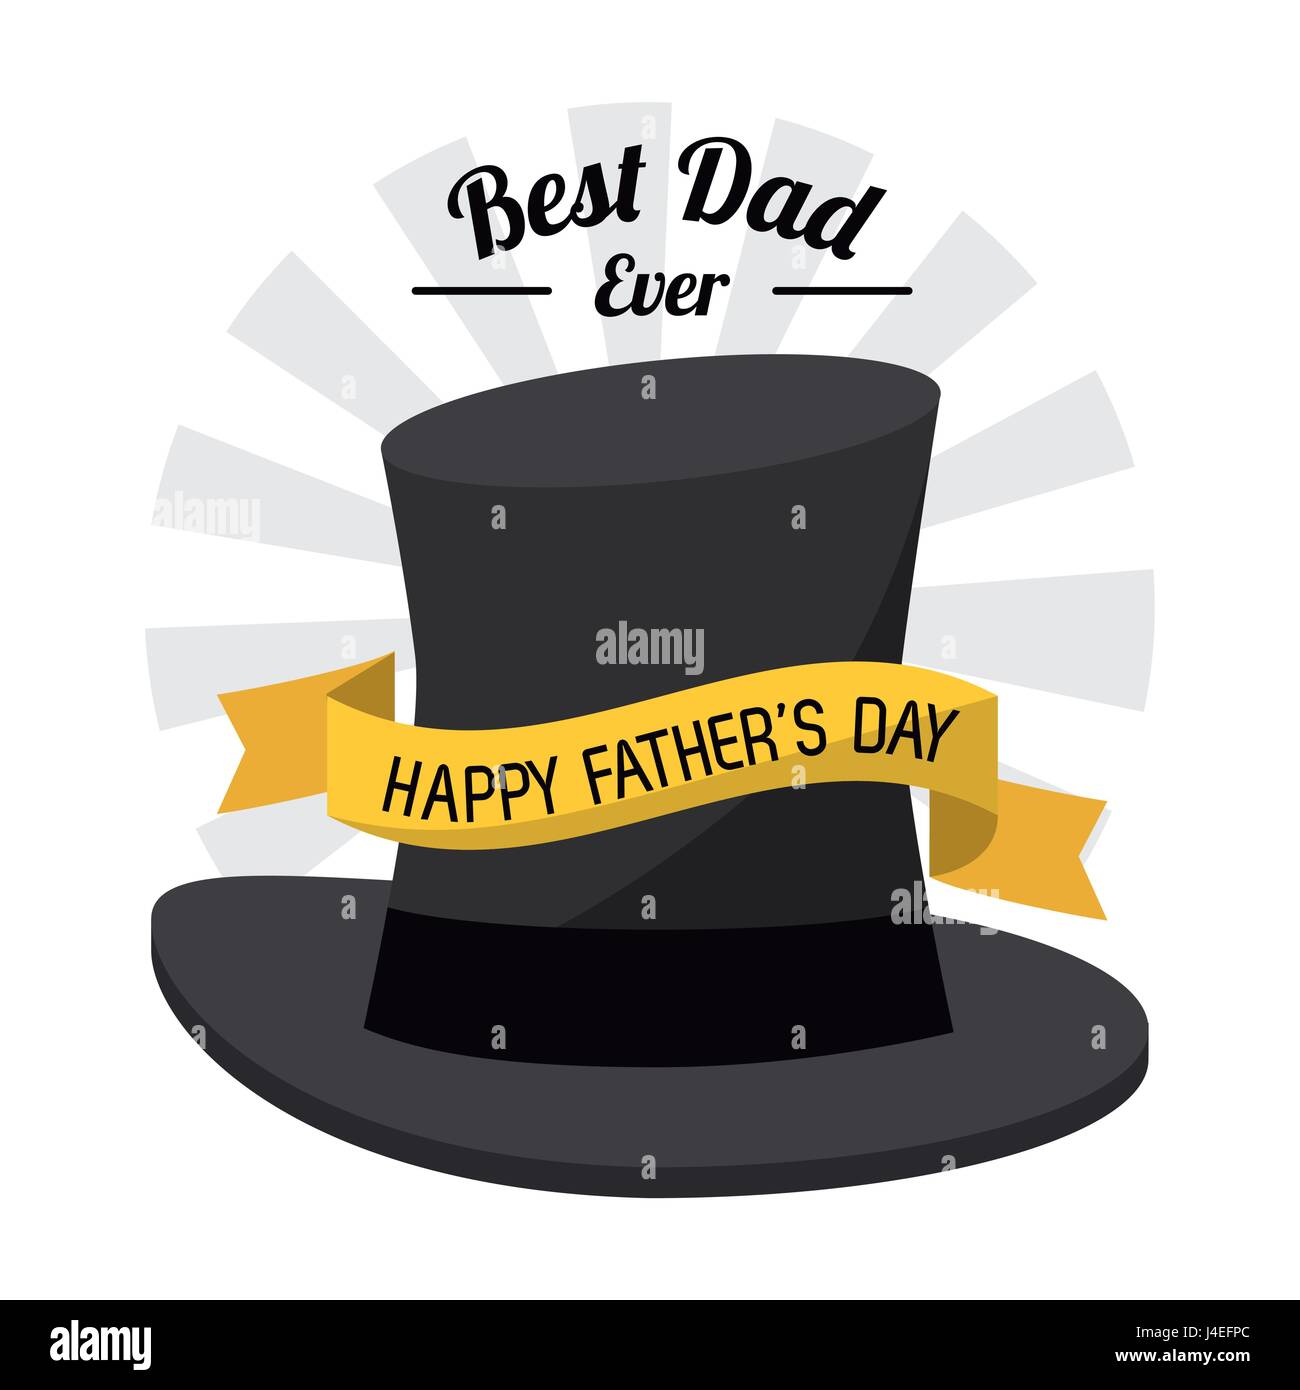 fathers day card, best dad ever. black hat ribbon decoration Stock Vector